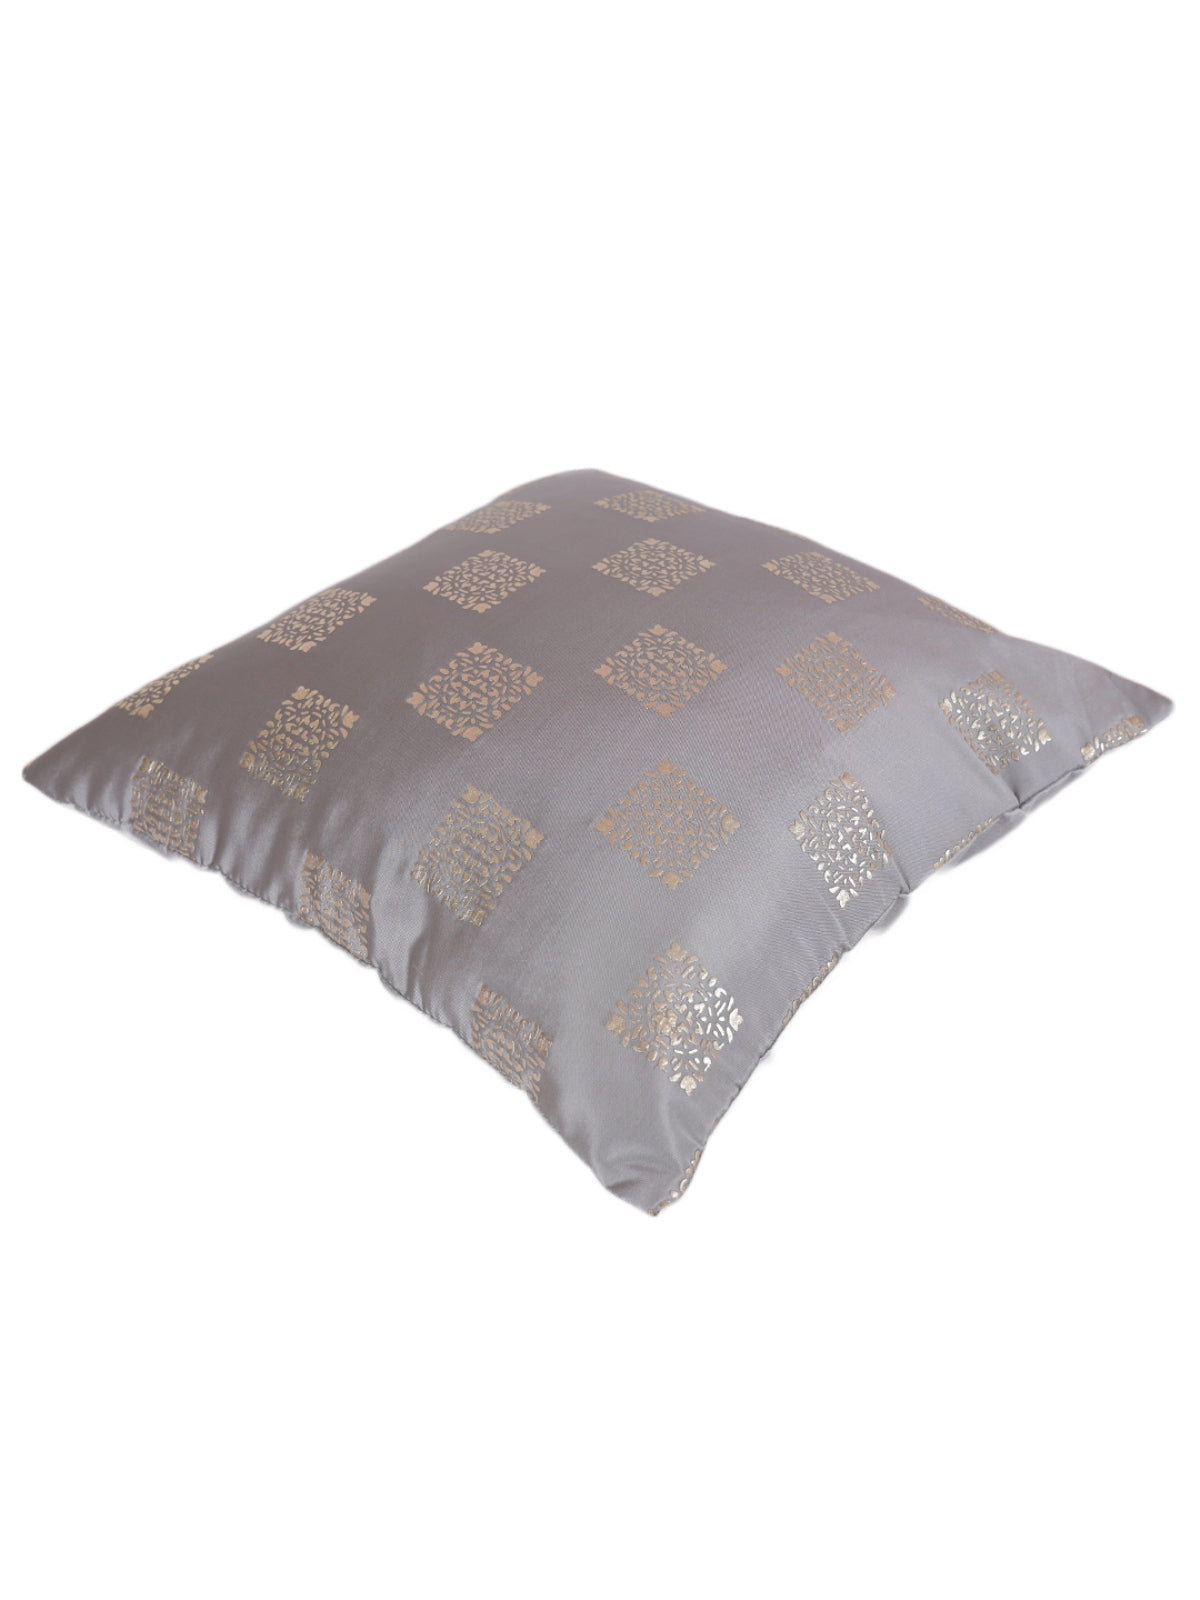 Polyester Ethnic Motifs Design Cushion Covers 16x16 Inches, Set of 5 - Silver